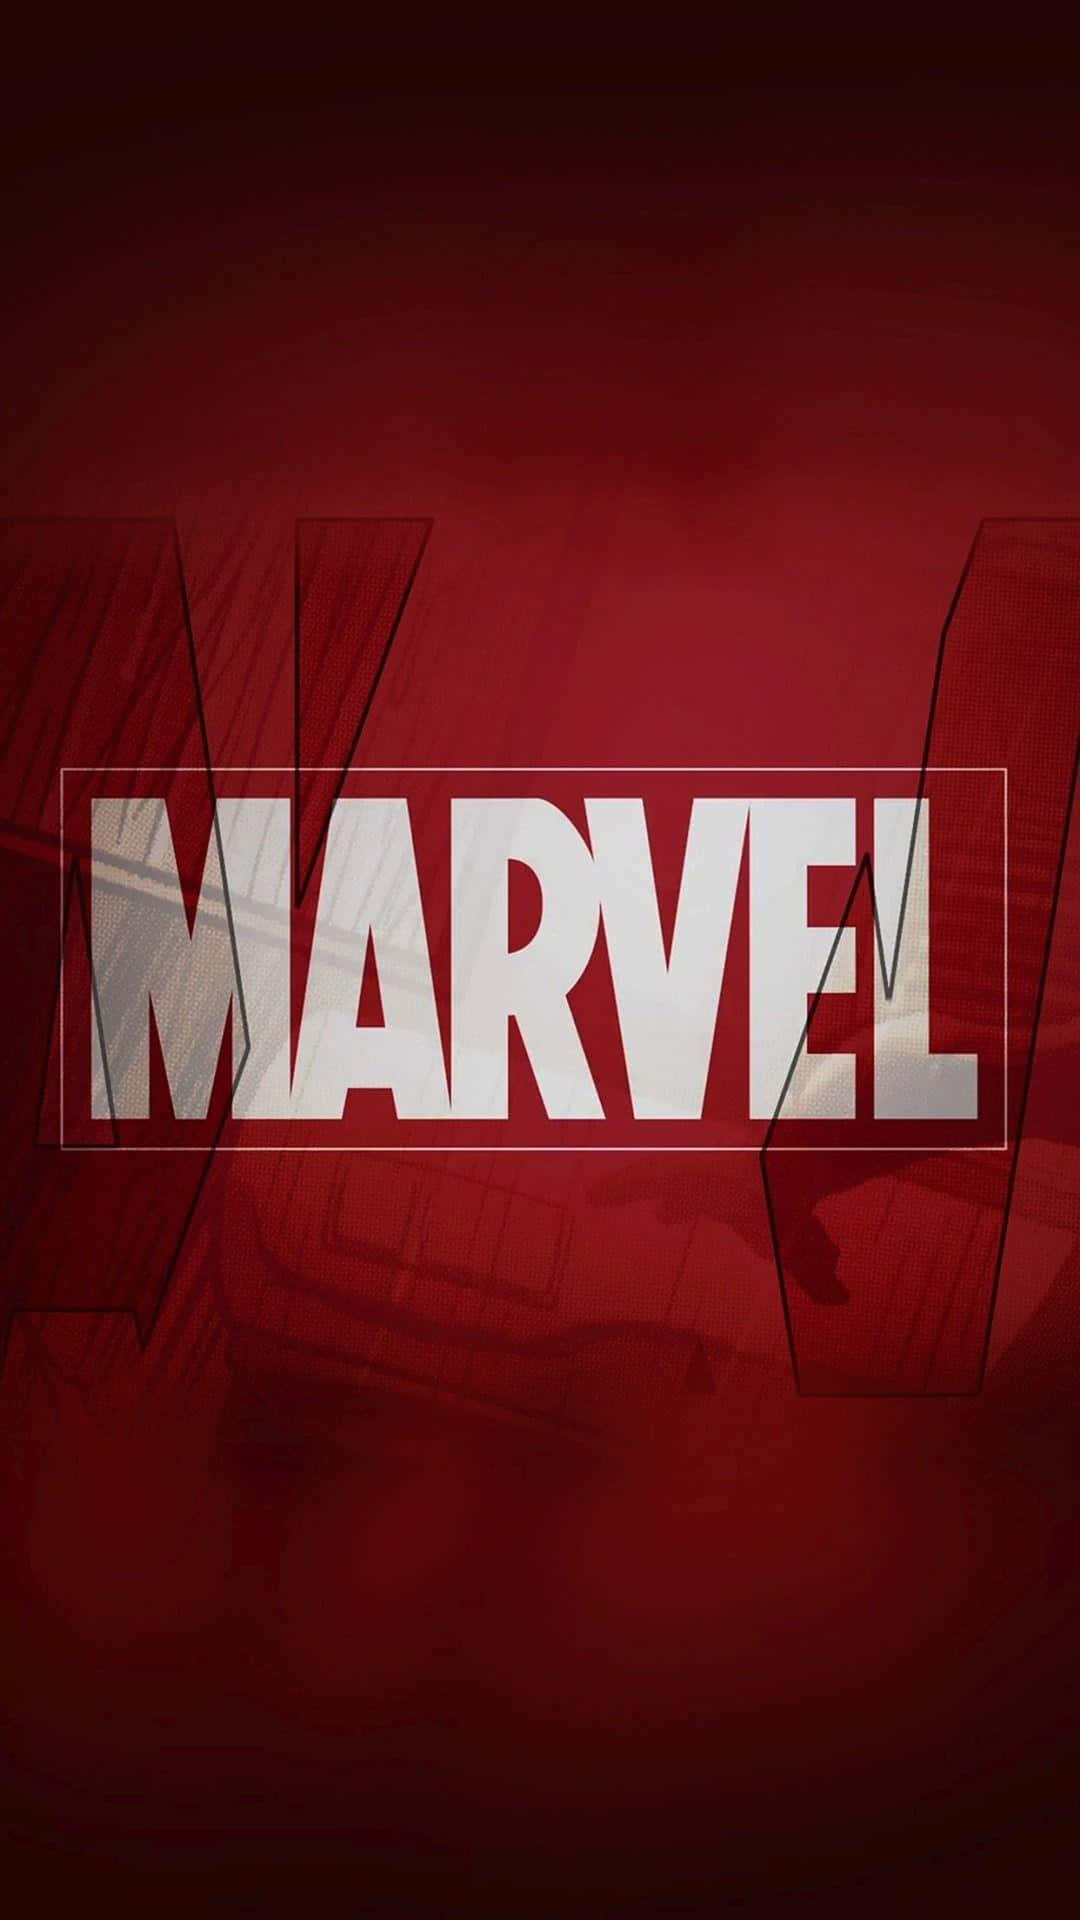 Marveliphone 11 Rotes Logo Wallpaper